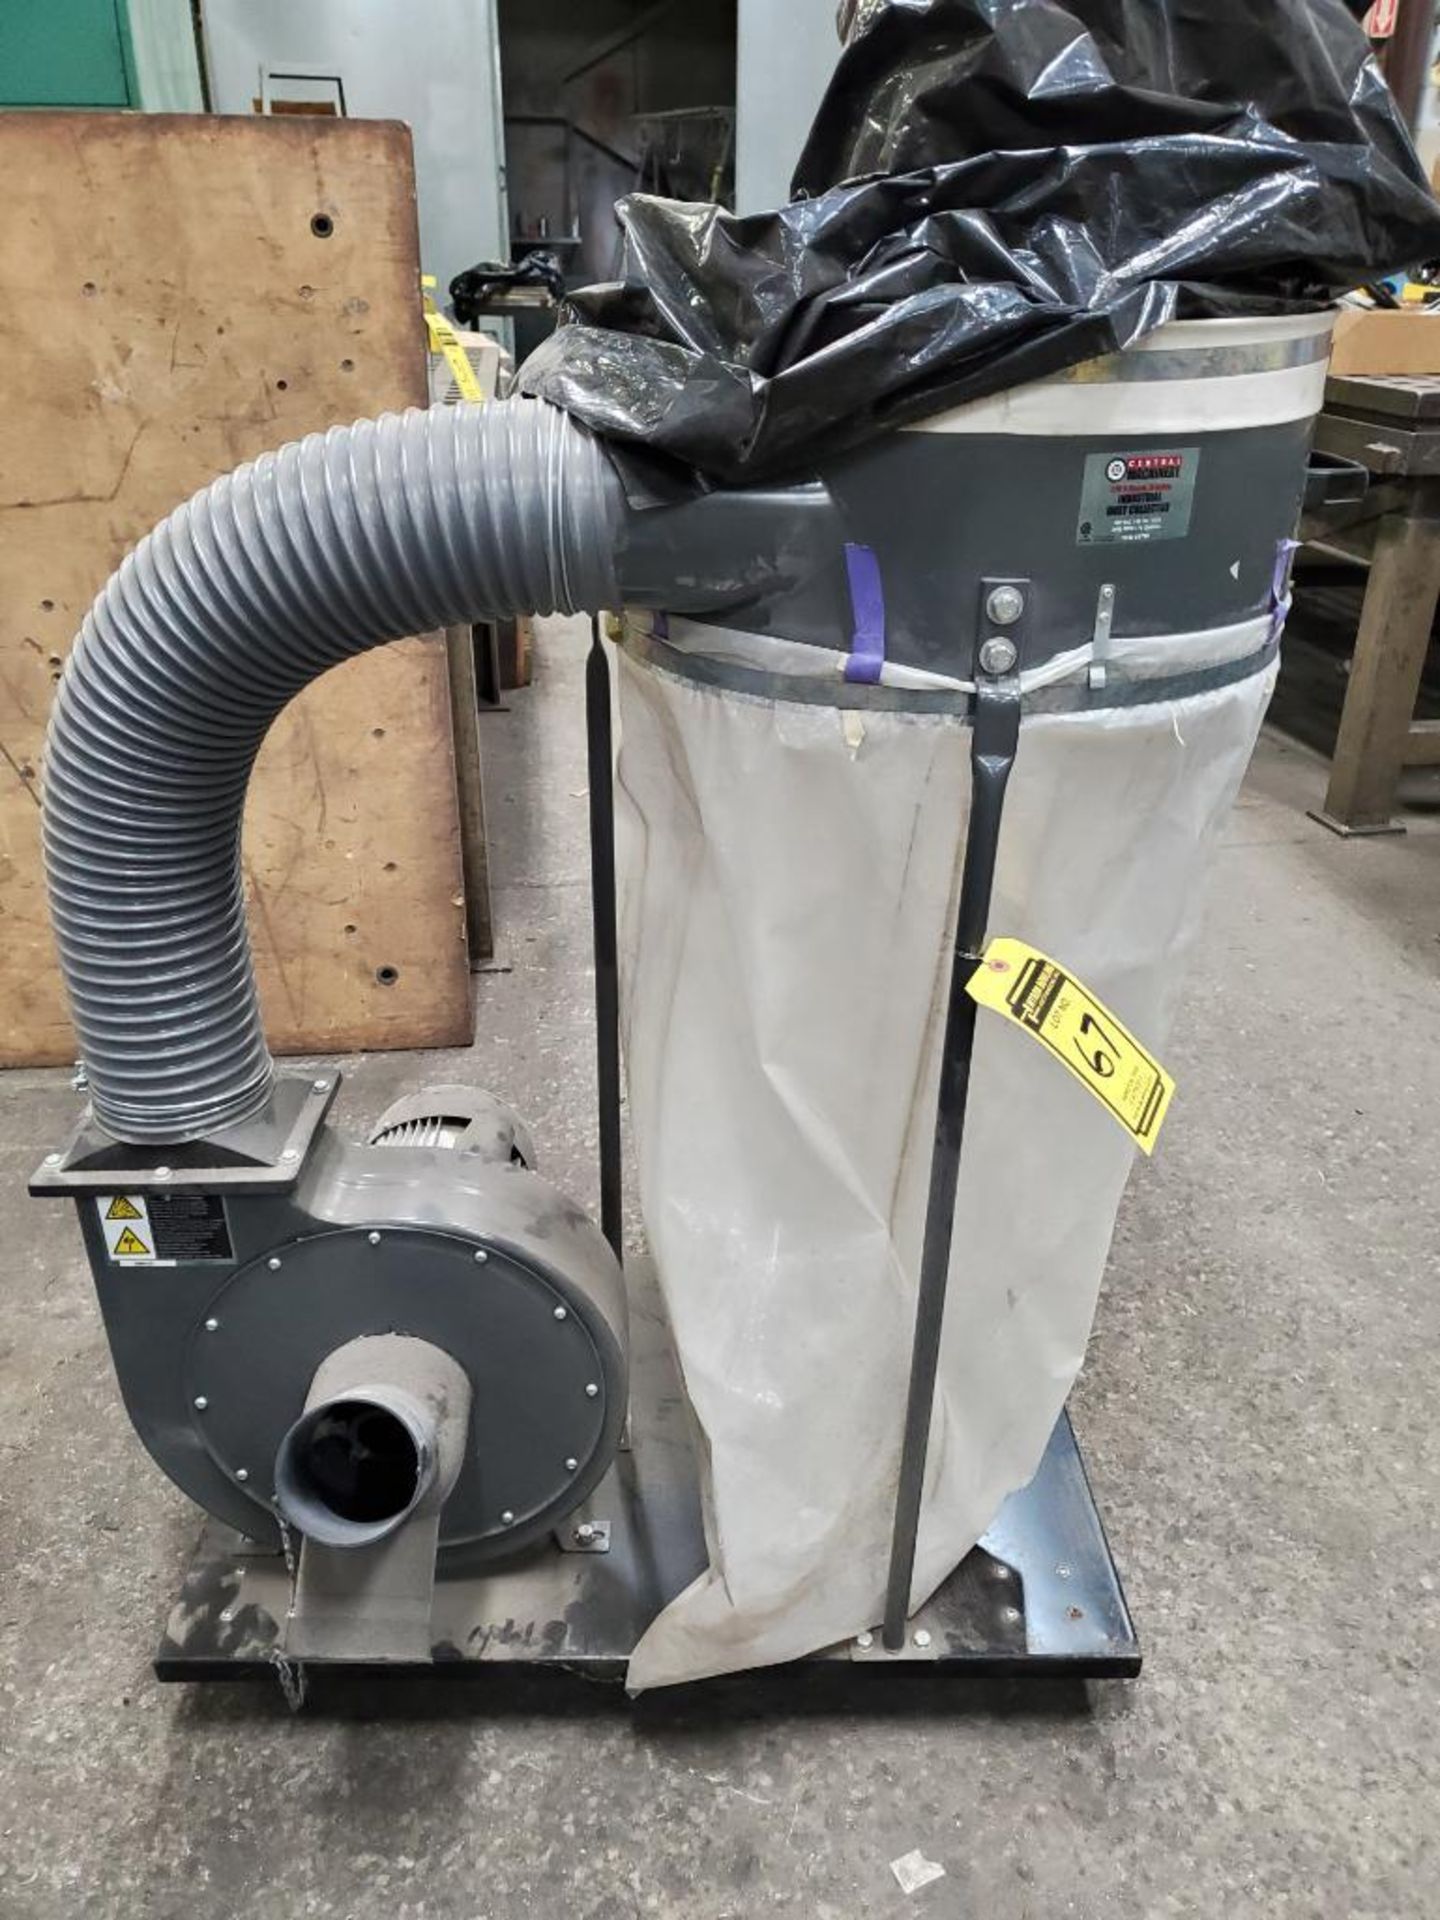 Central Machinery Portable Industrial Dust Collector, 2 HP, 5 Micron, 70-Gallon - Image 2 of 7